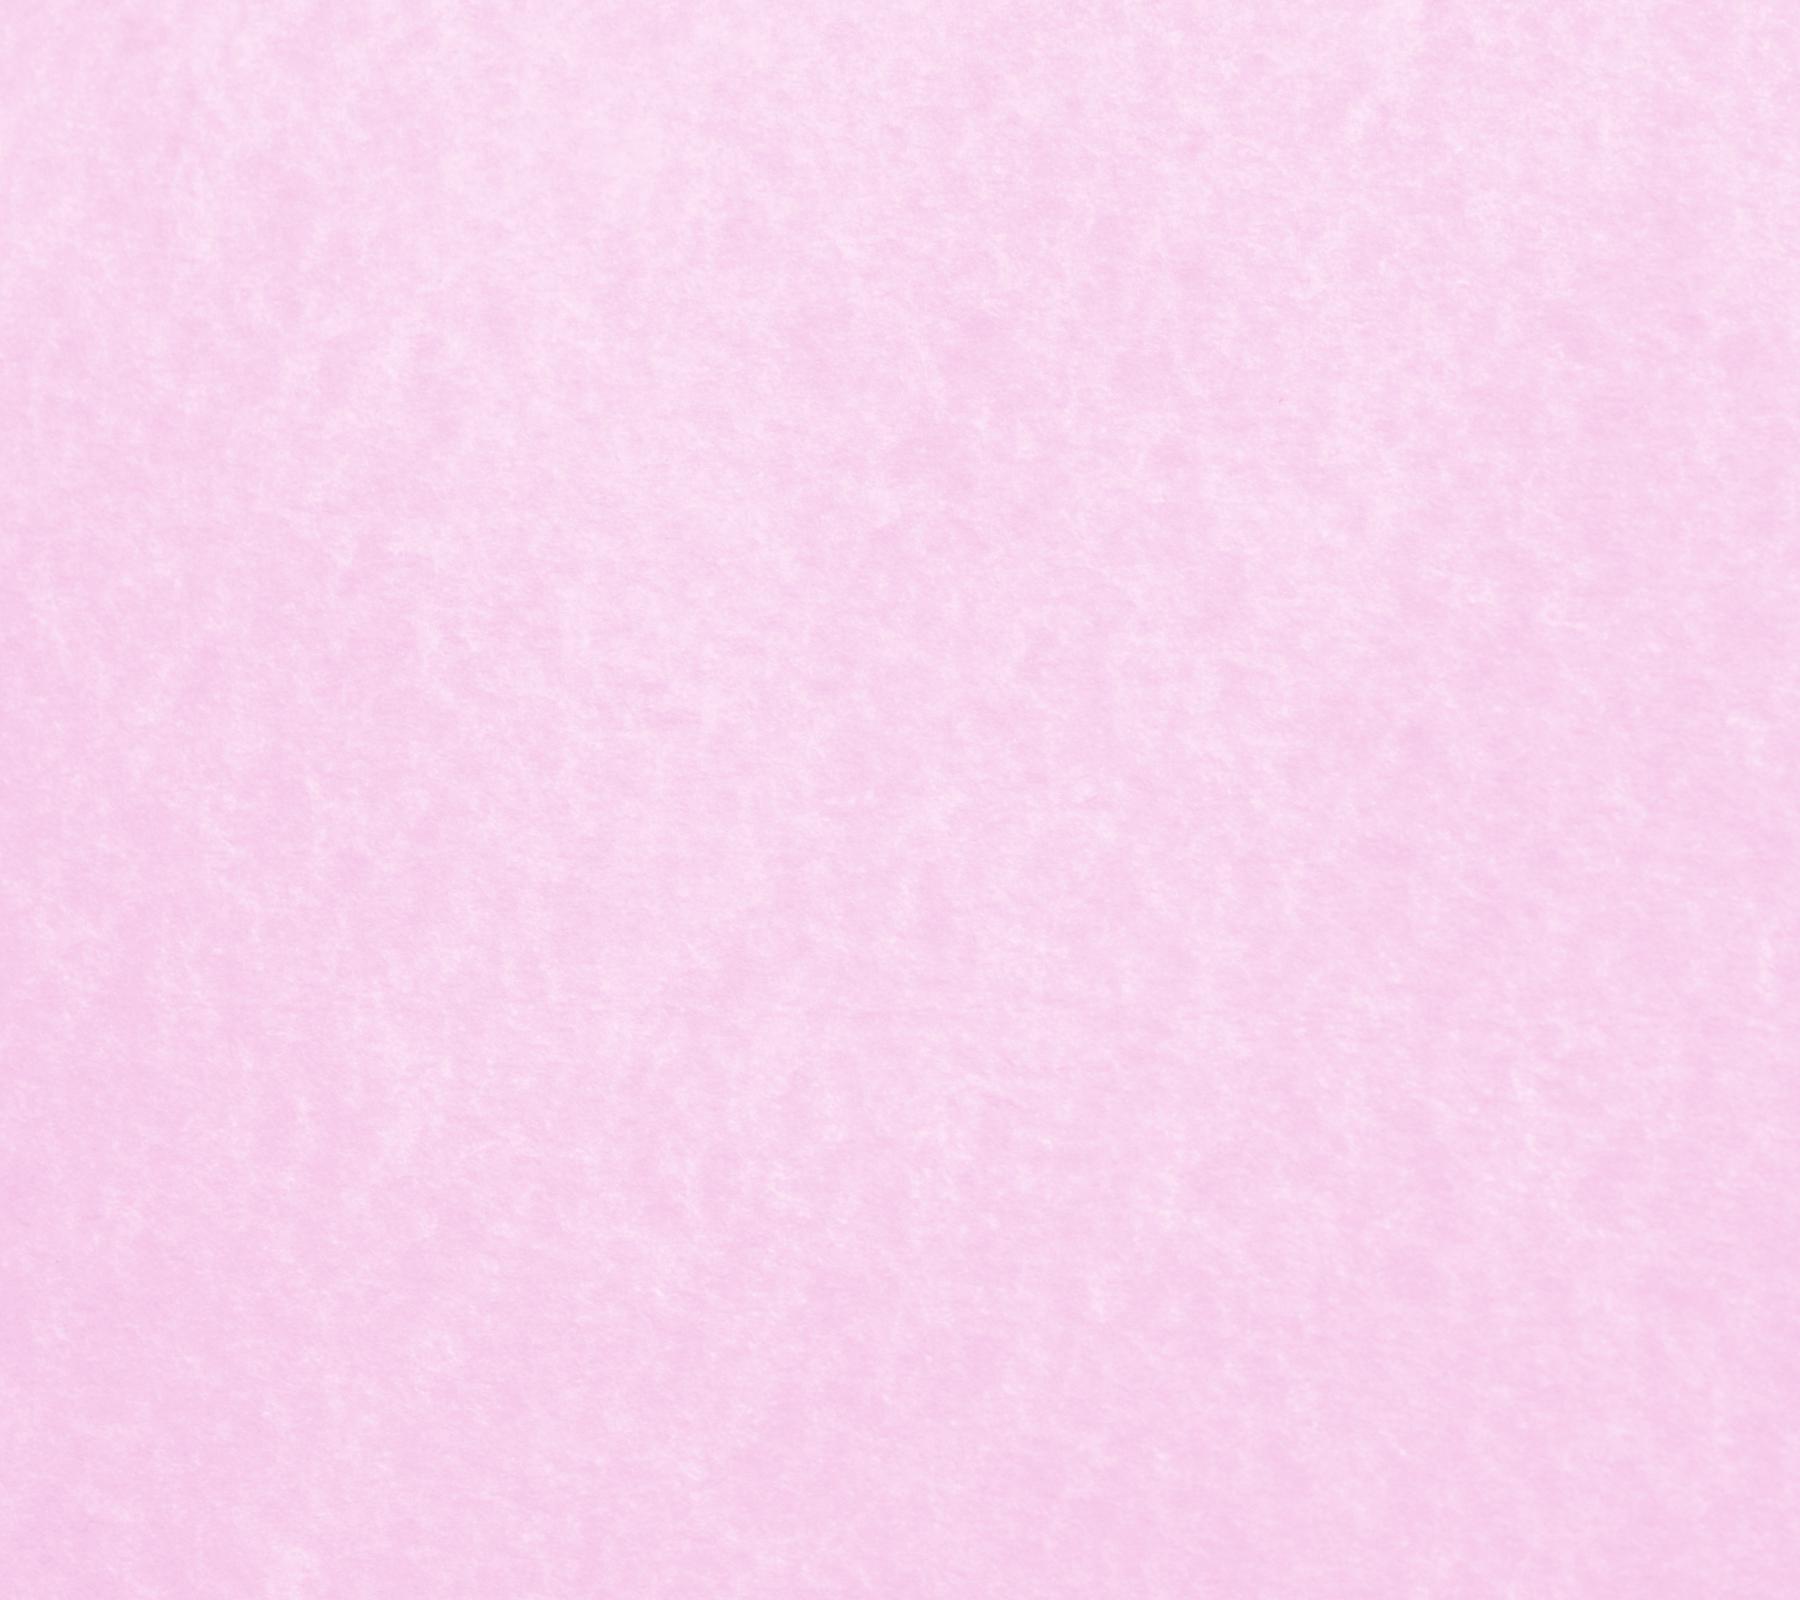 Light Pink Paper Texture Background Border Of Hues Of Light Pink